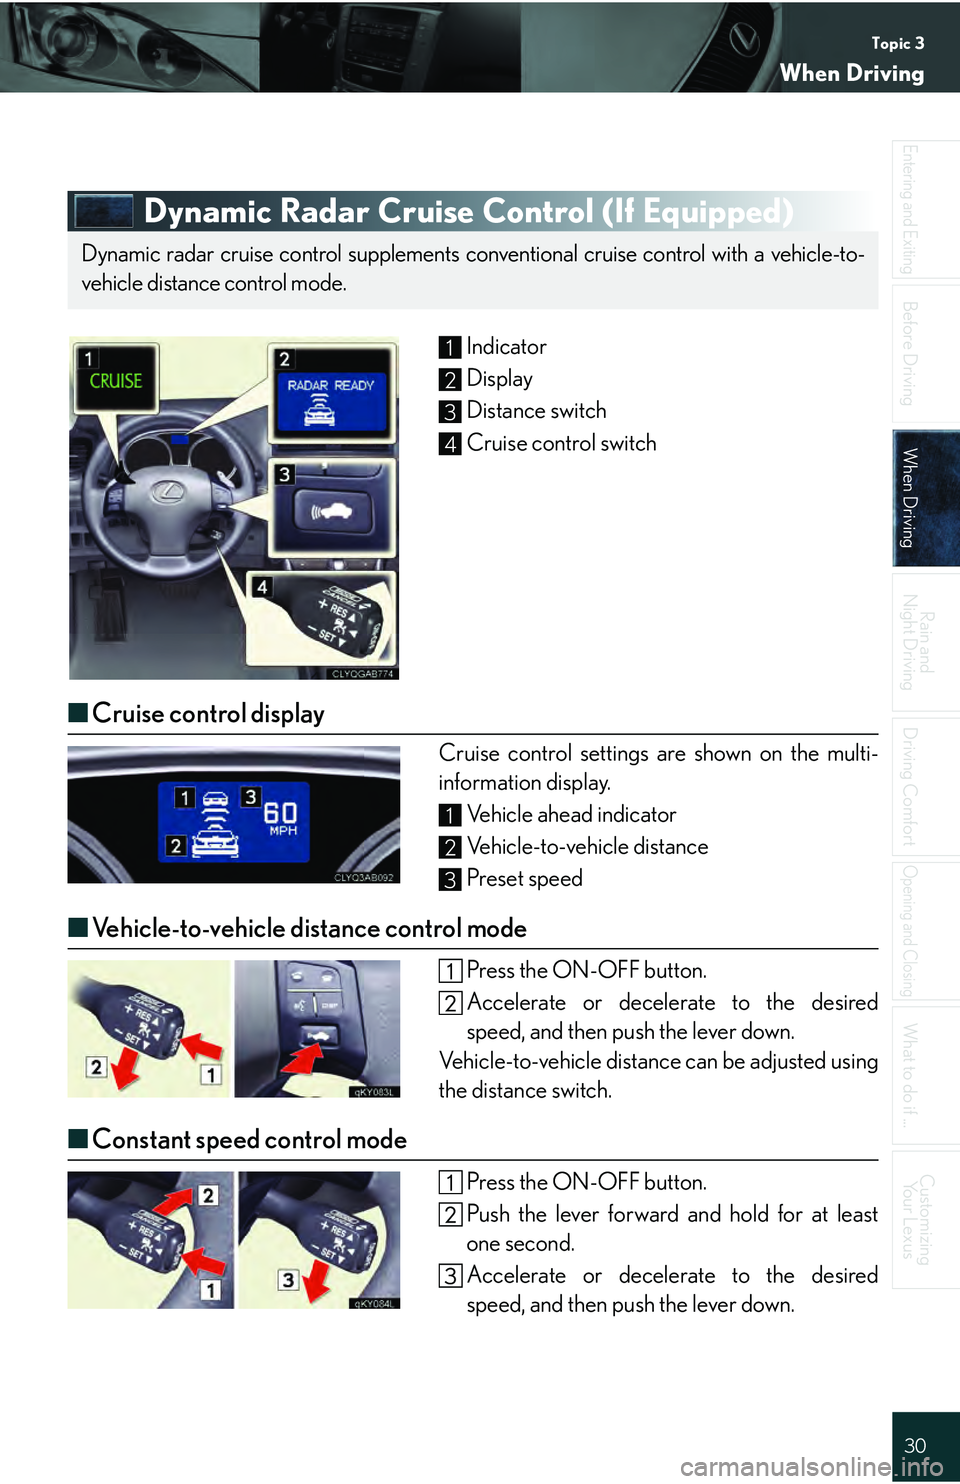 Lexus IS250 2009  Specifications / LEXUS 2009 IS350/250 QUICK GUIDE OWNERS MANUAL (OM53689U) Topic 3
When Driving
30
Entering and Exiting
Before DrivingBefore Driving
When DrivingWhen Driving
Rain and 
Night Driving
Driving Comfort
Opening and Closing
What to do if ...
Customizing Yo u r  L e